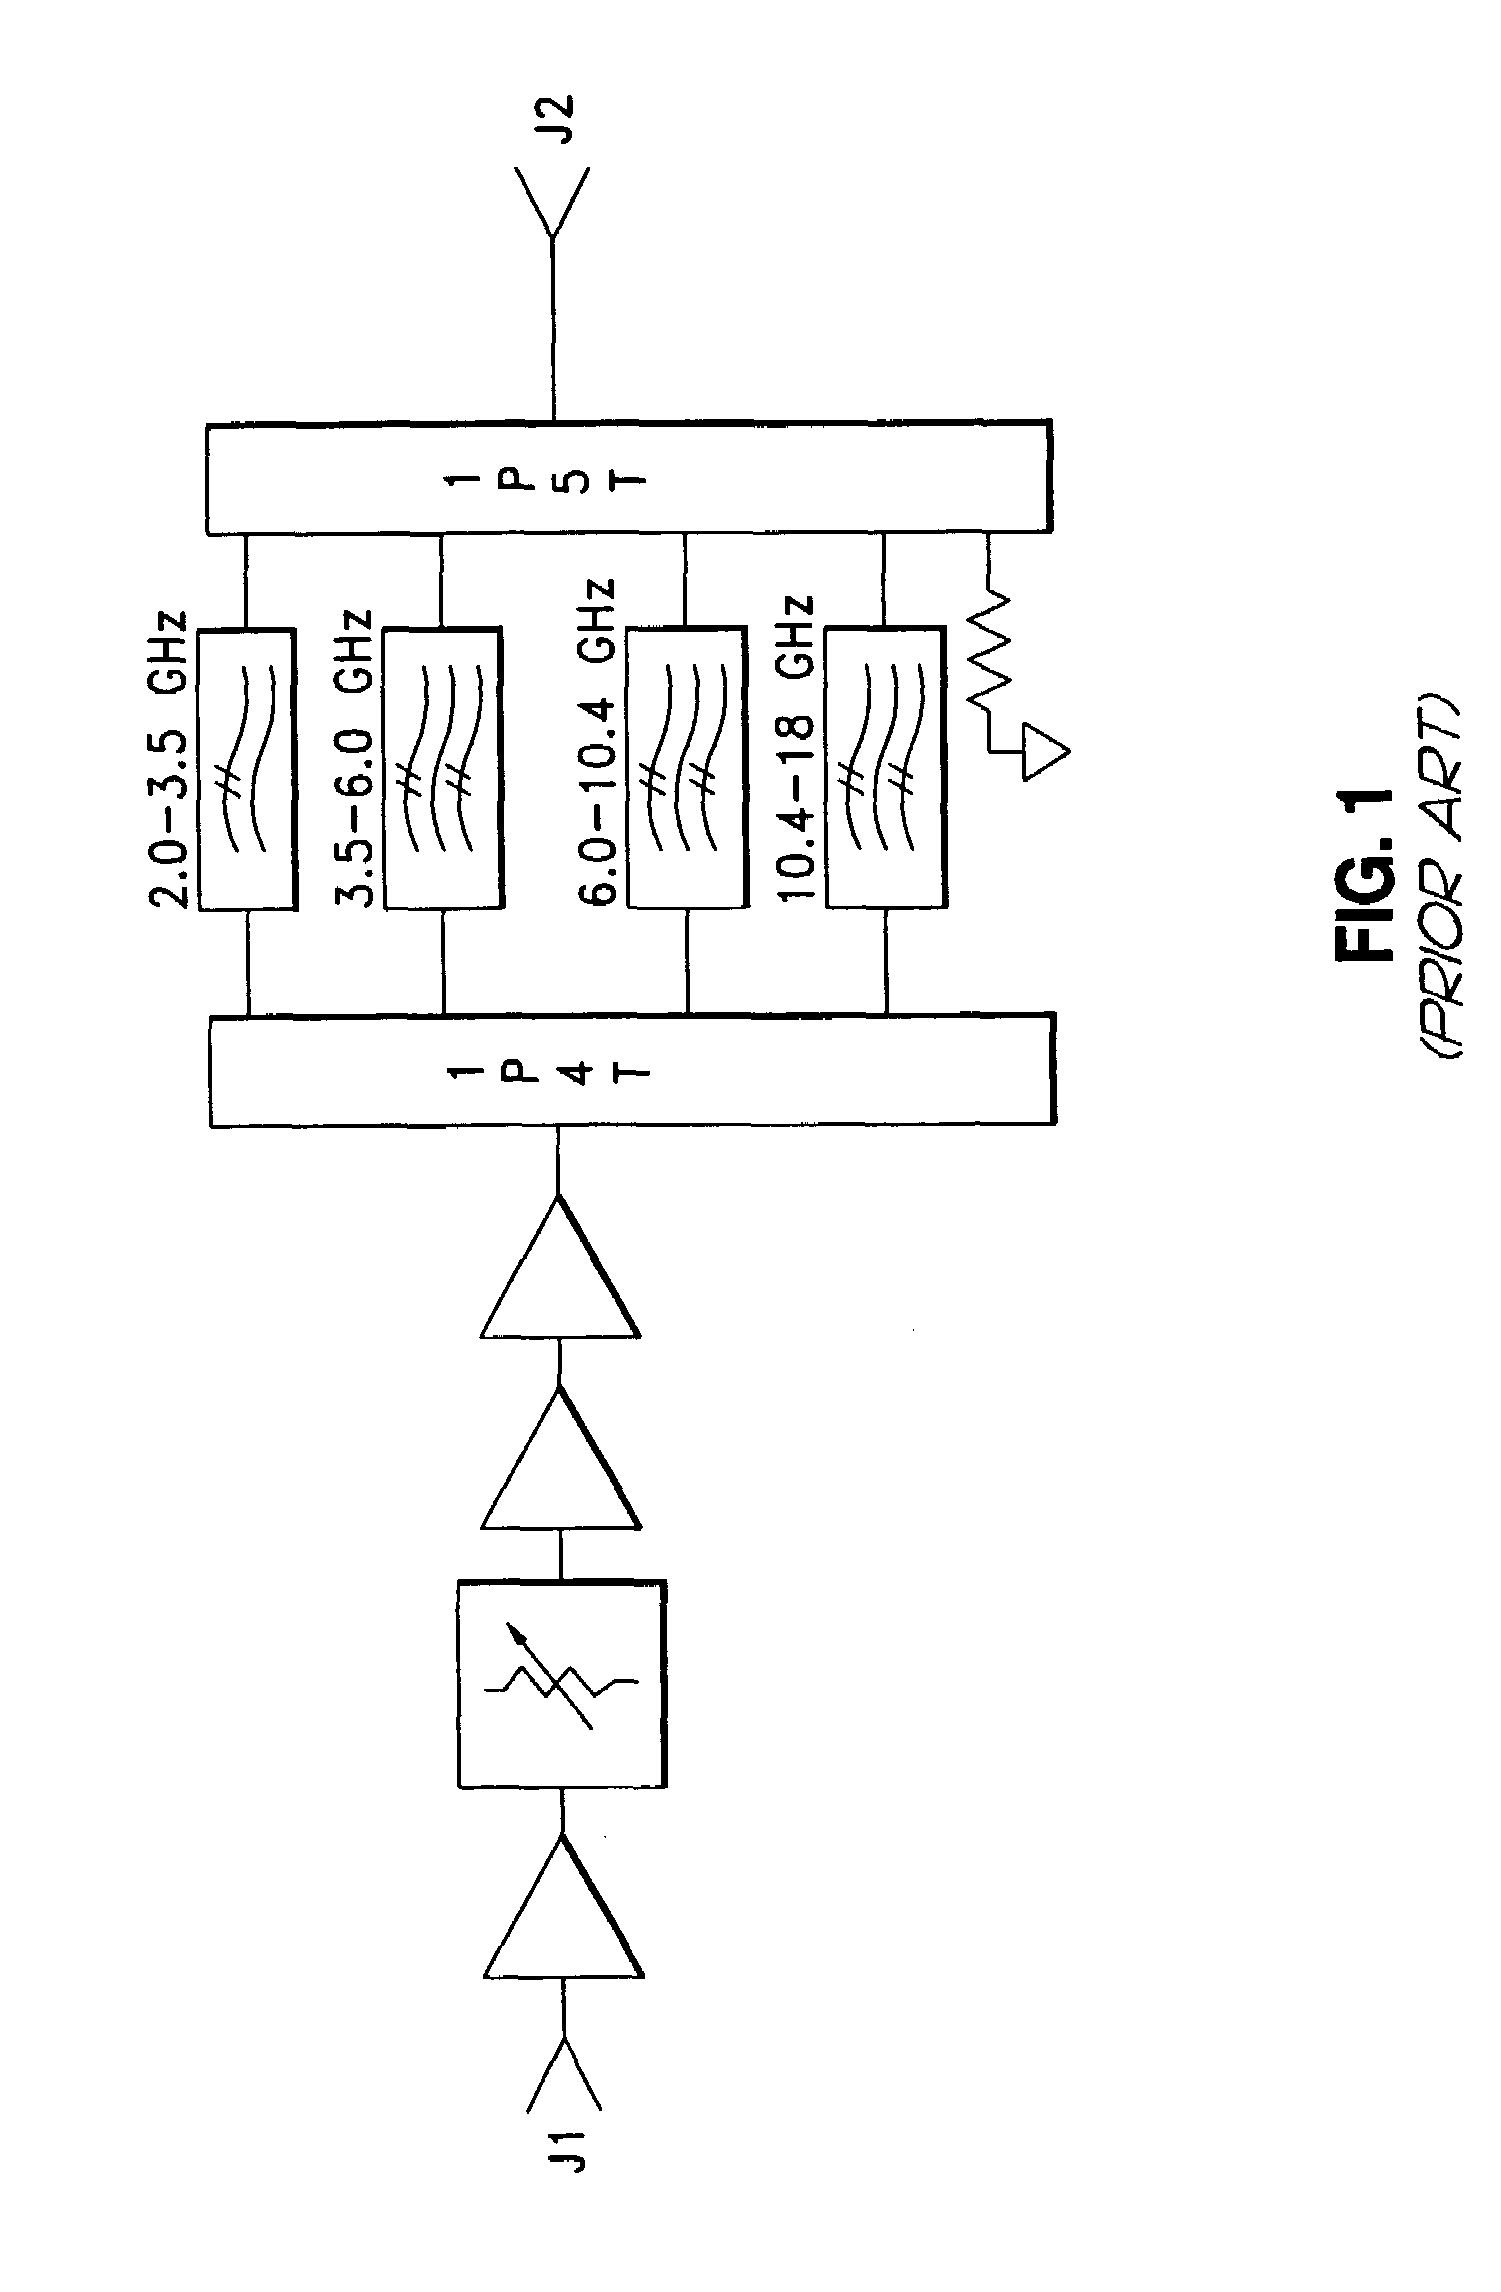 Switched multiplexer method to combine multiple broadband RF sources